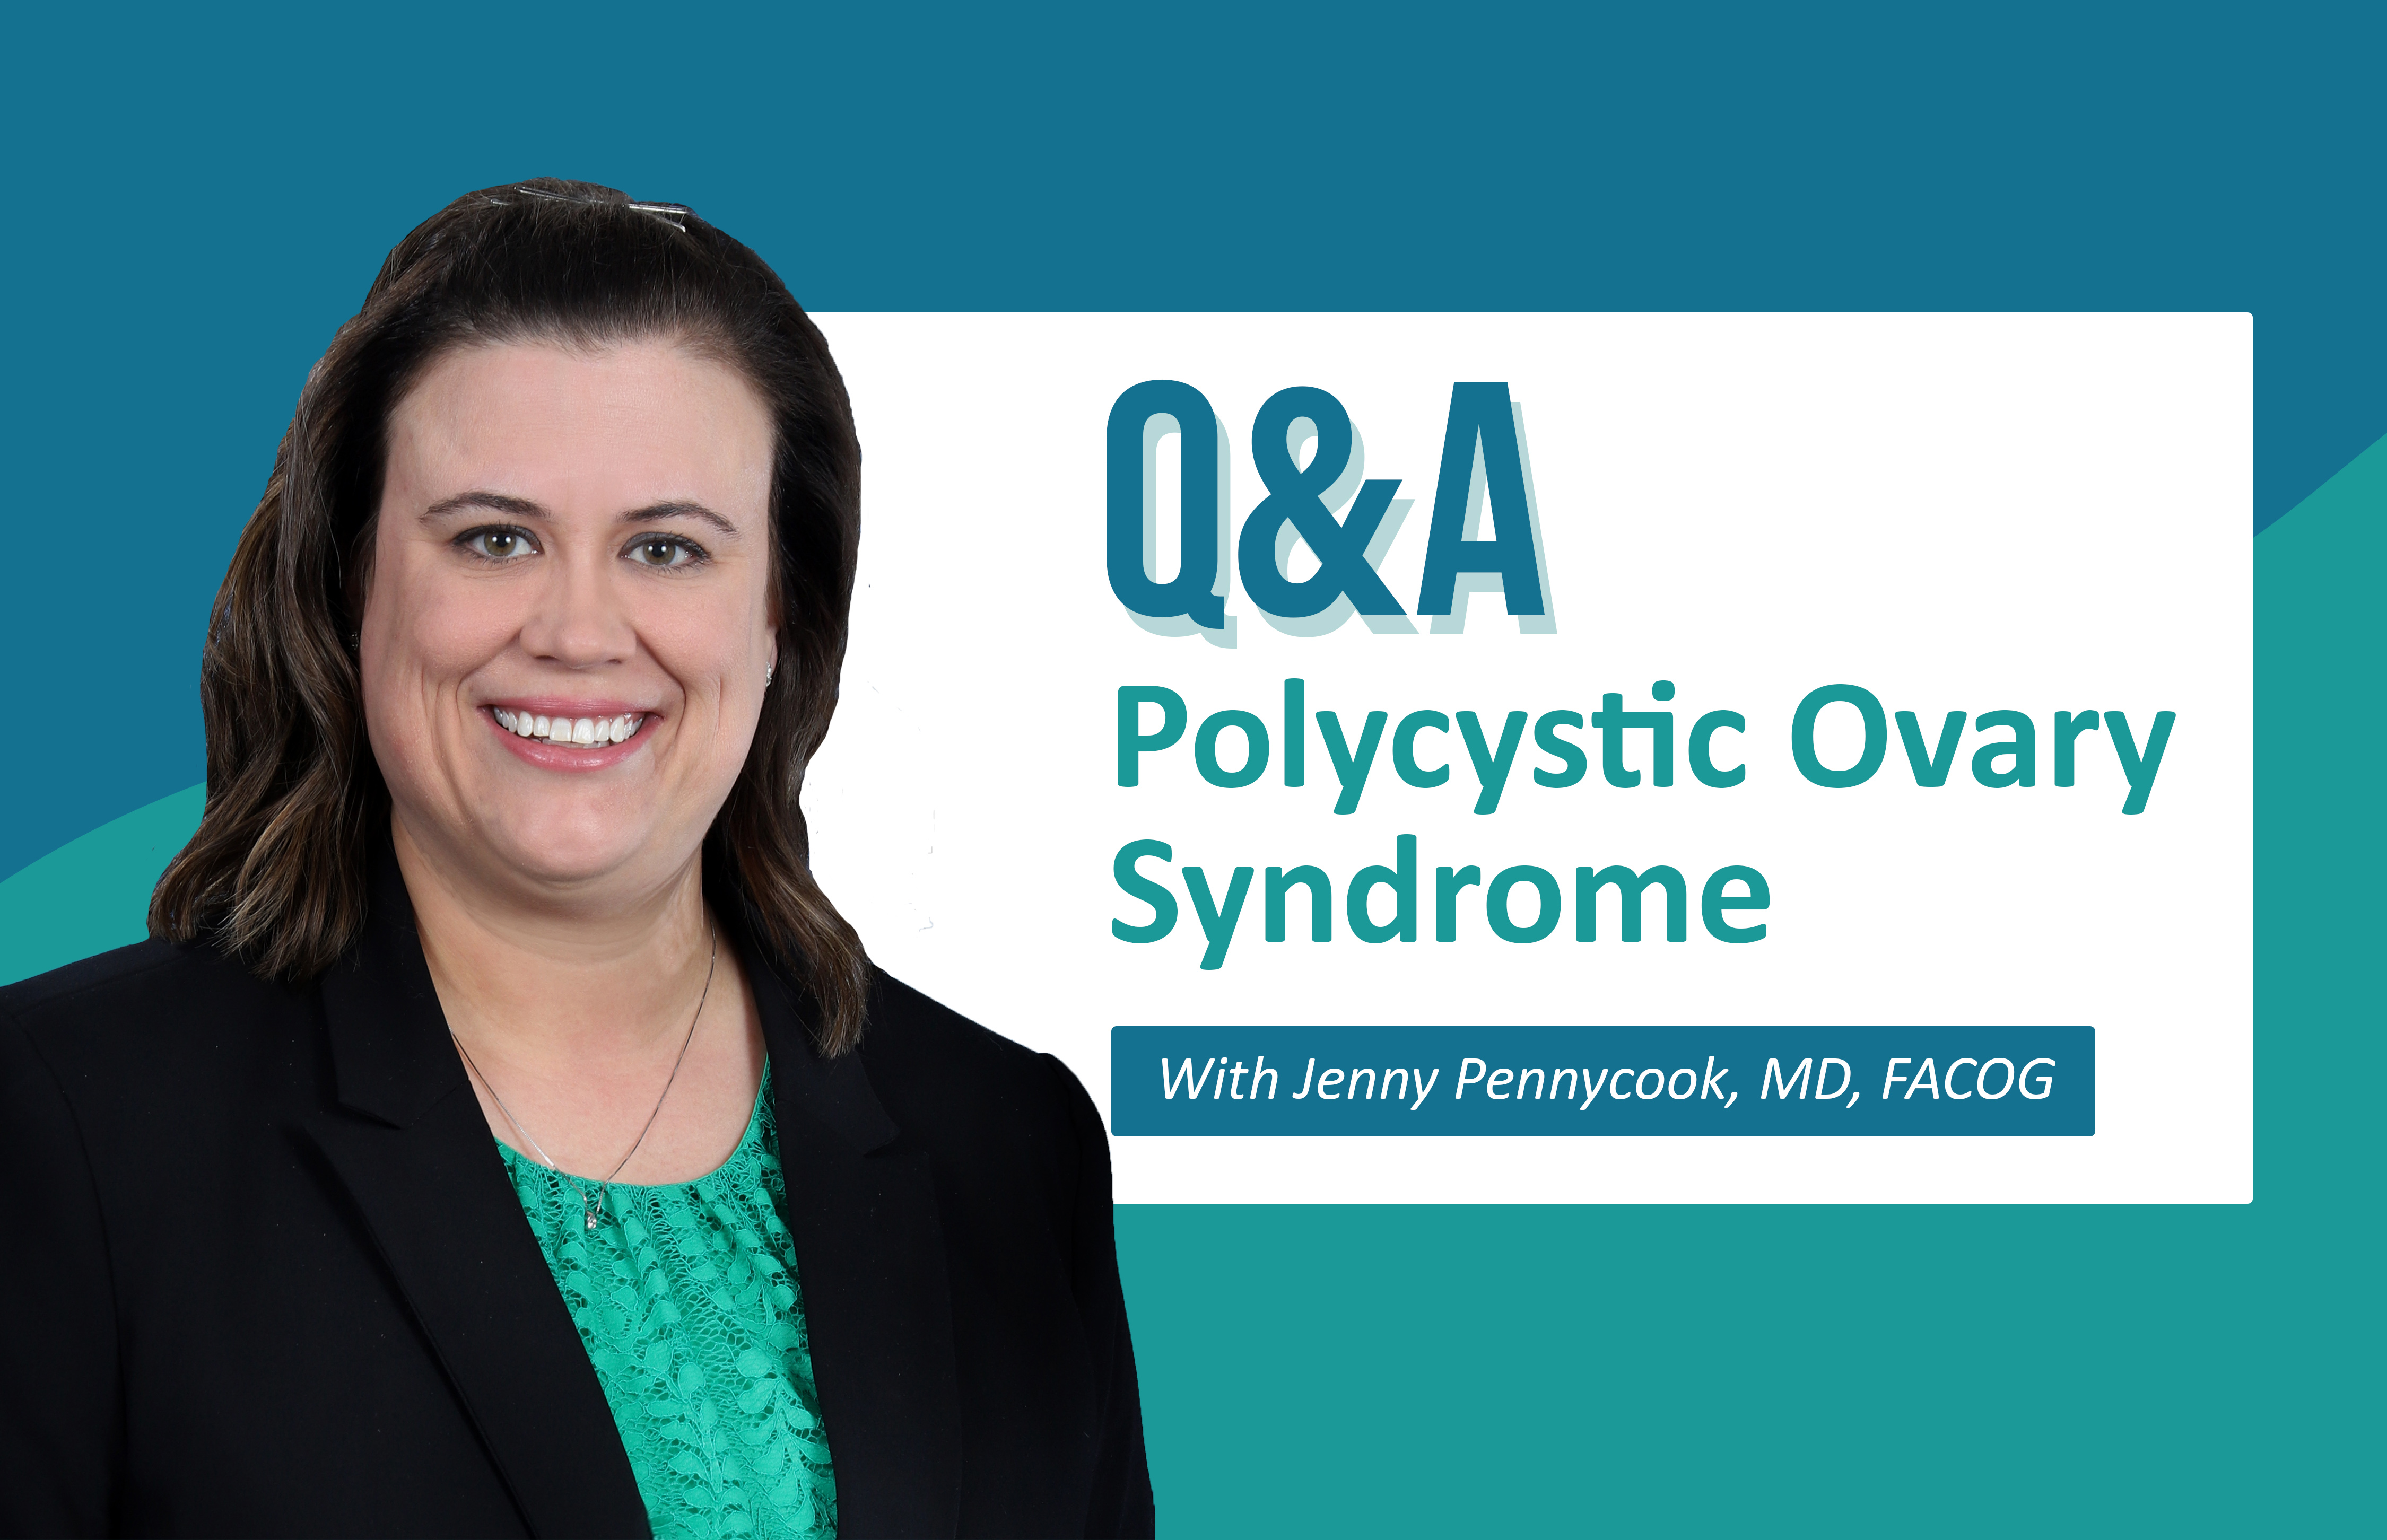 Q&A About Polycystic Ovarian Syndrome (PCOS) with Dr. Pennycook